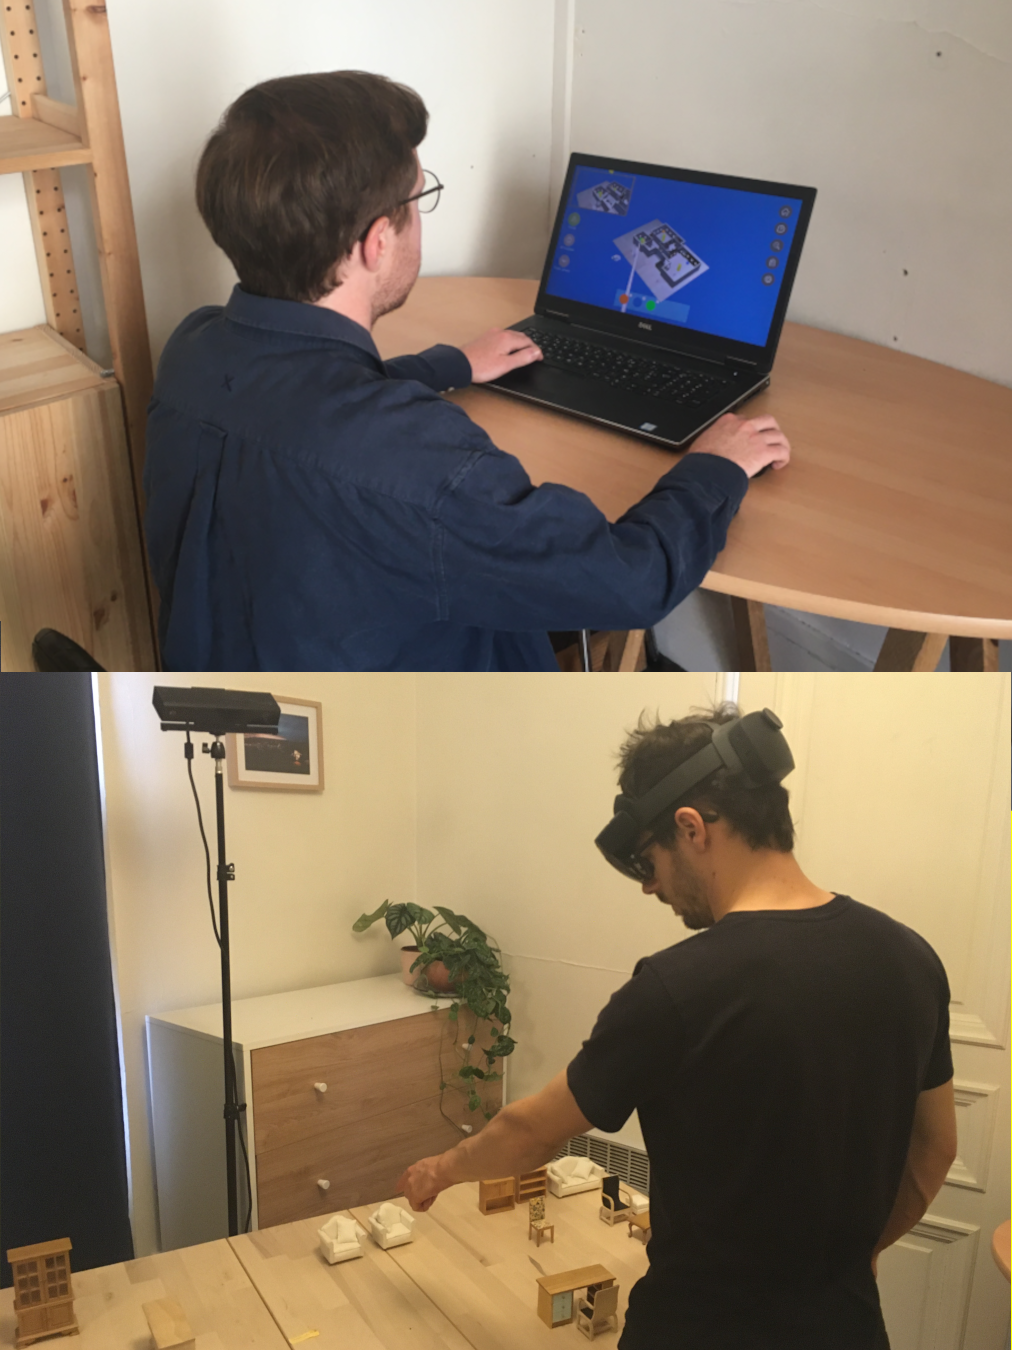 Two pictures, one of a desktop user, one of a AR headset user in front of a 3D camera pointing at physical mock-ups.